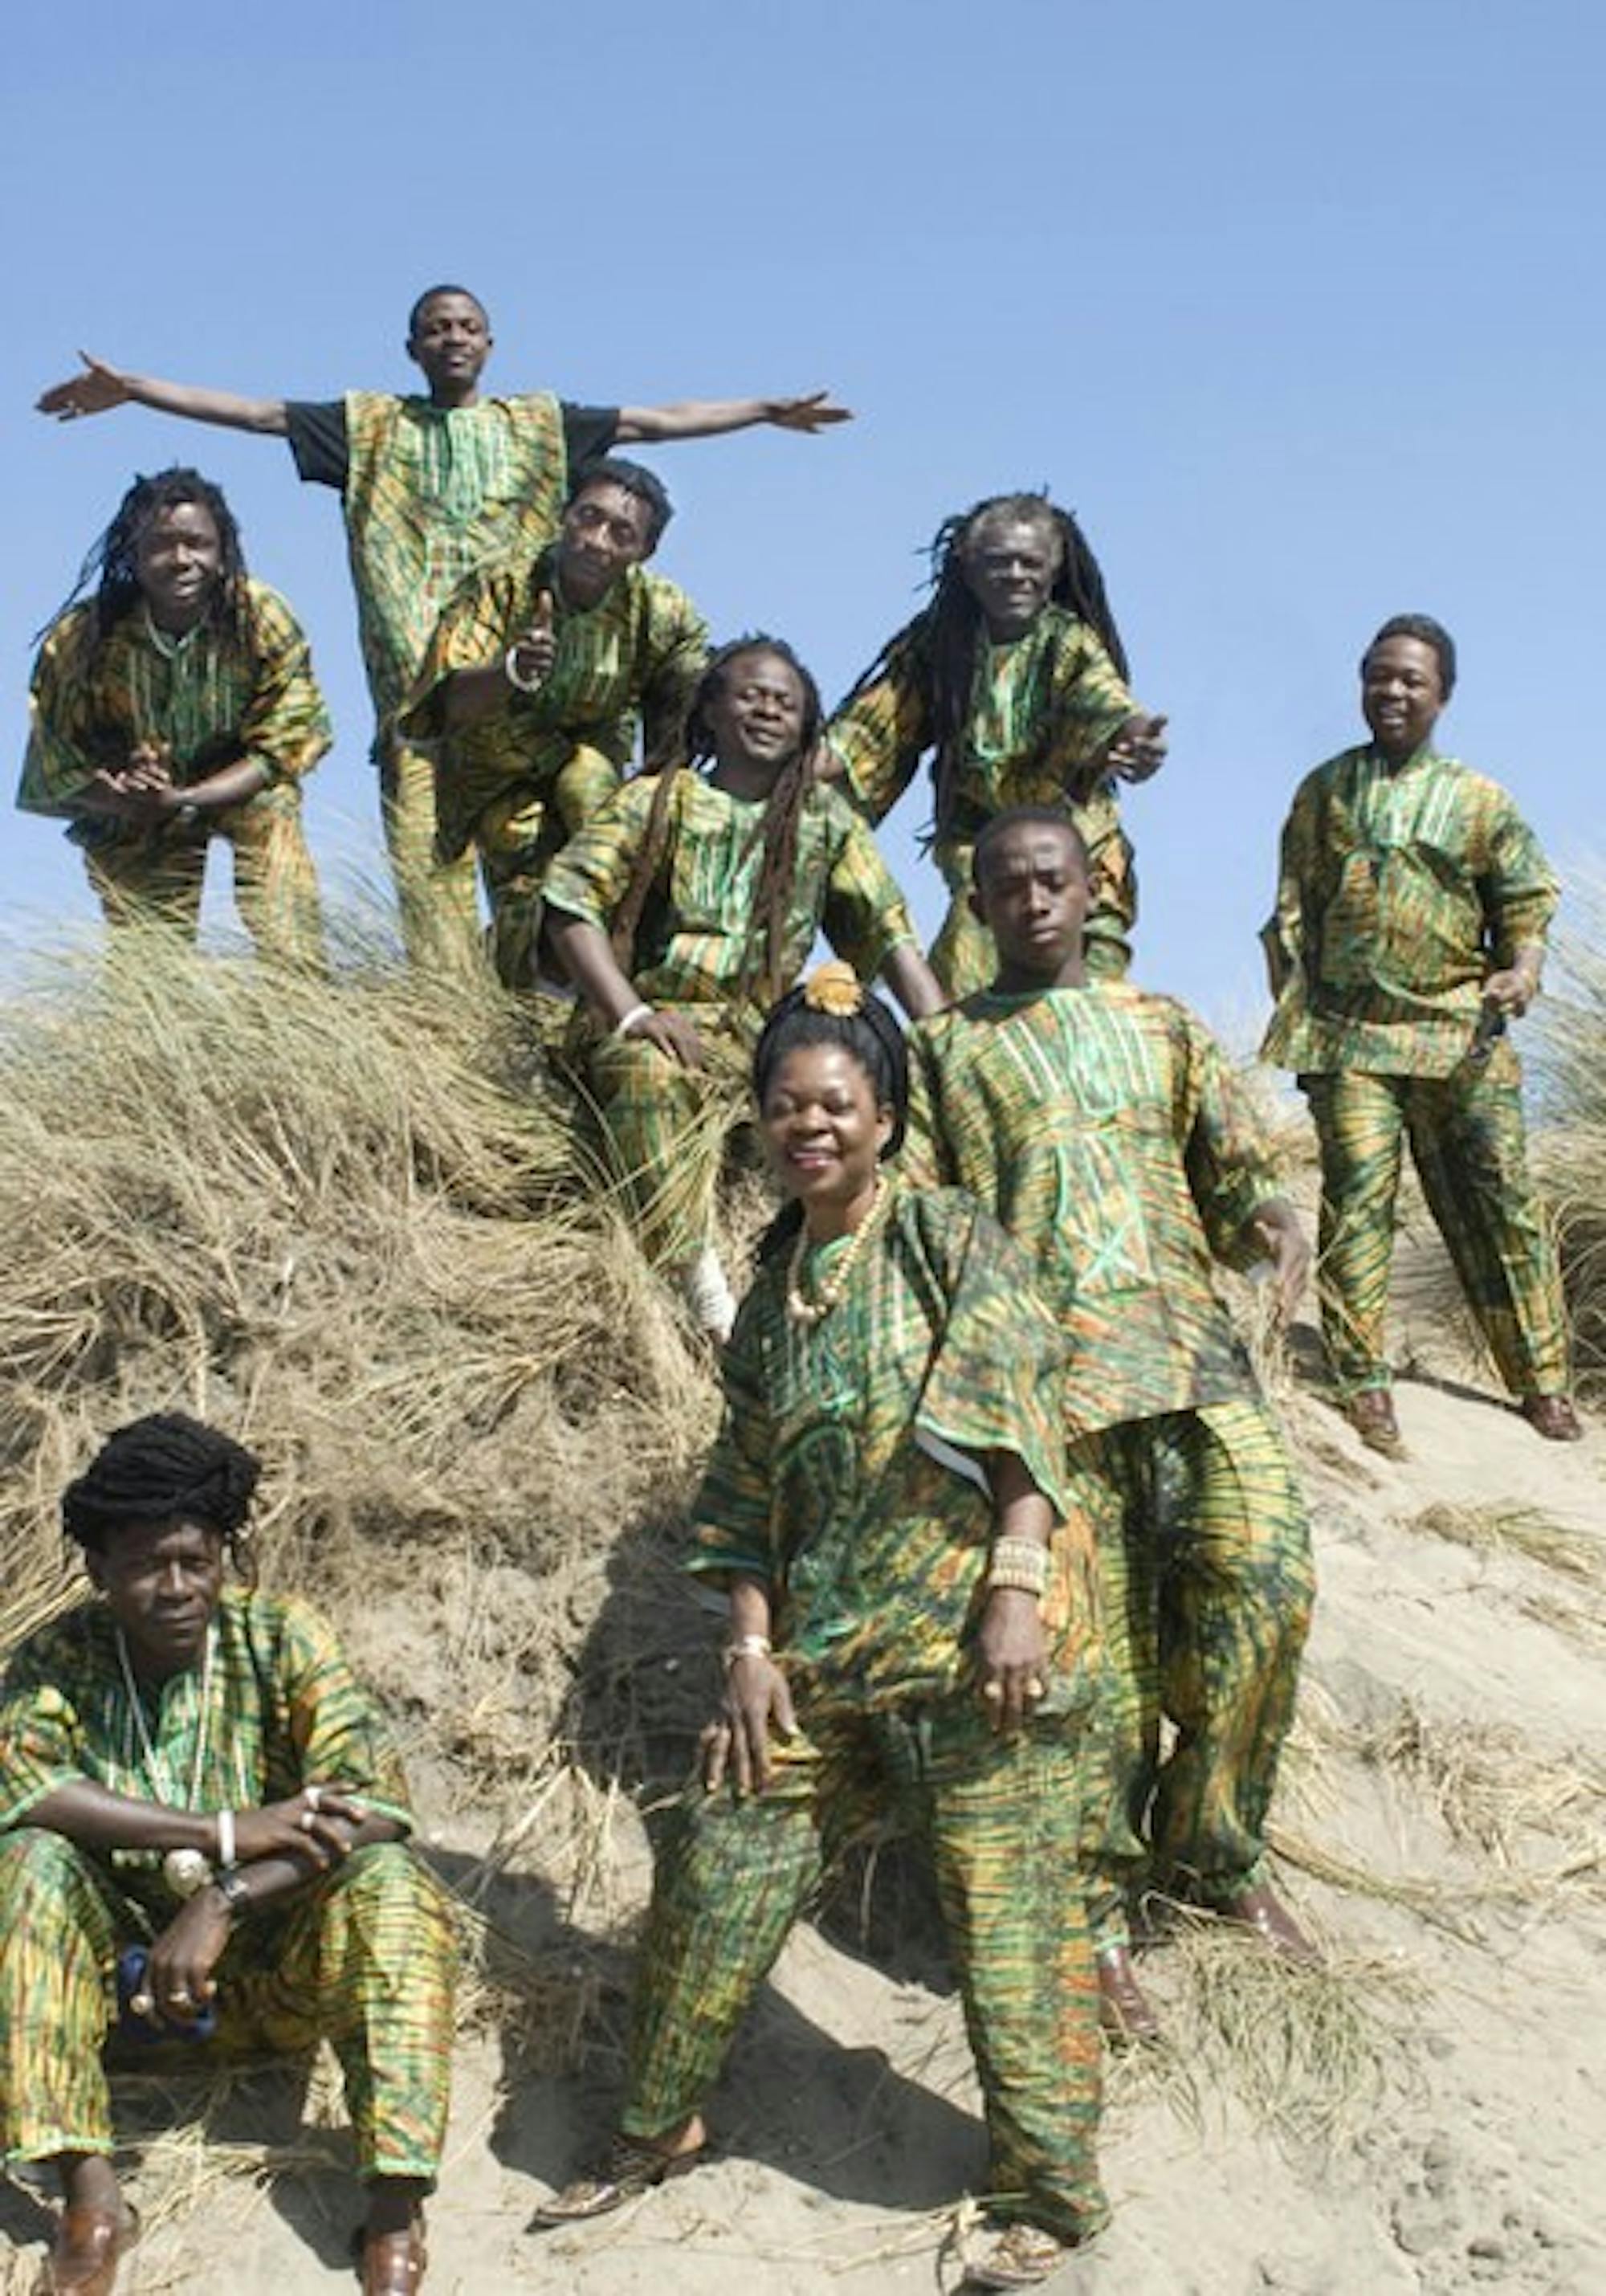 The Sierra Leone Refugee All Stars will perform on the Green on Friday evening.